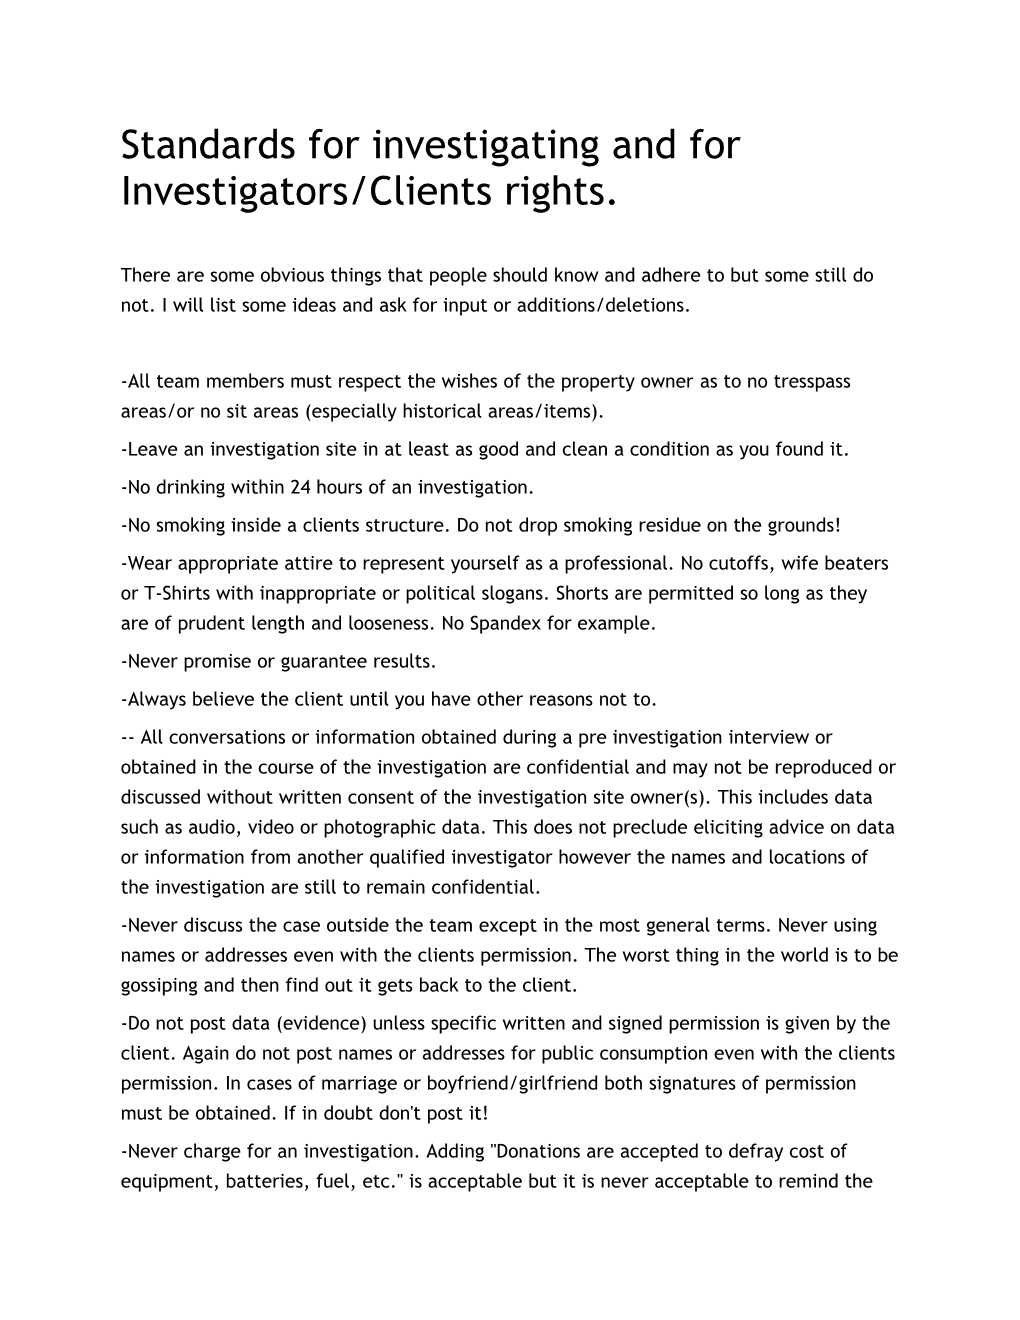 Standards for Investigating and for Investigators/Clients Rights